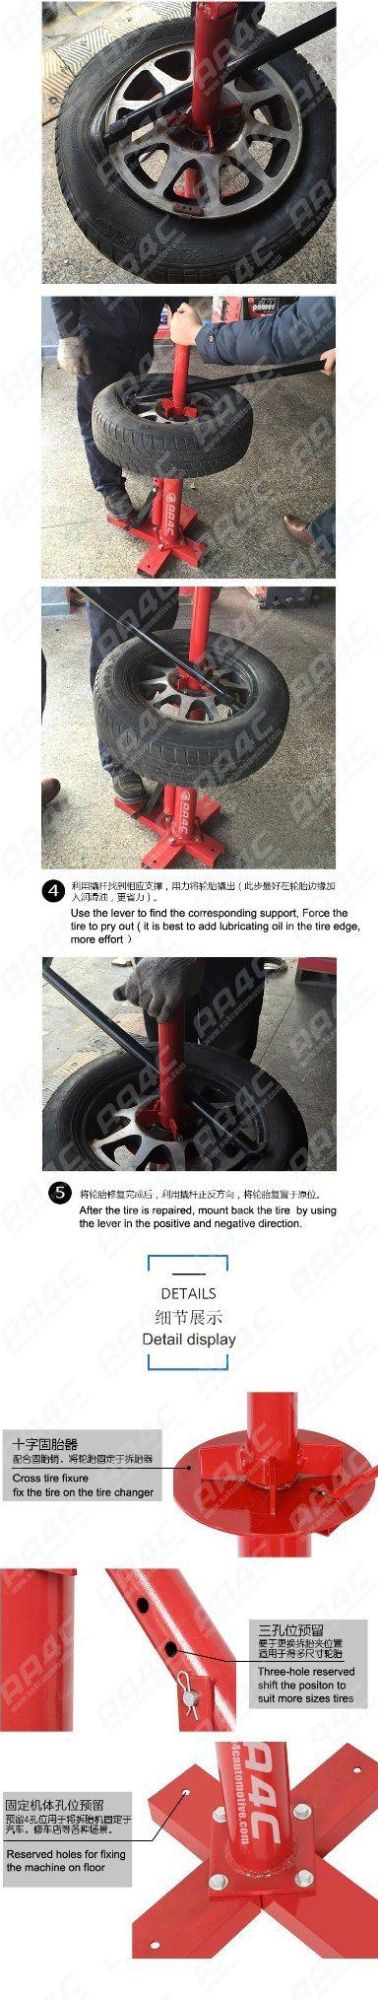 AA4c Portabe Manual Tire Changer Tyre Remover Tire Service Machine Mounting/Demounting Machine AA-C03002